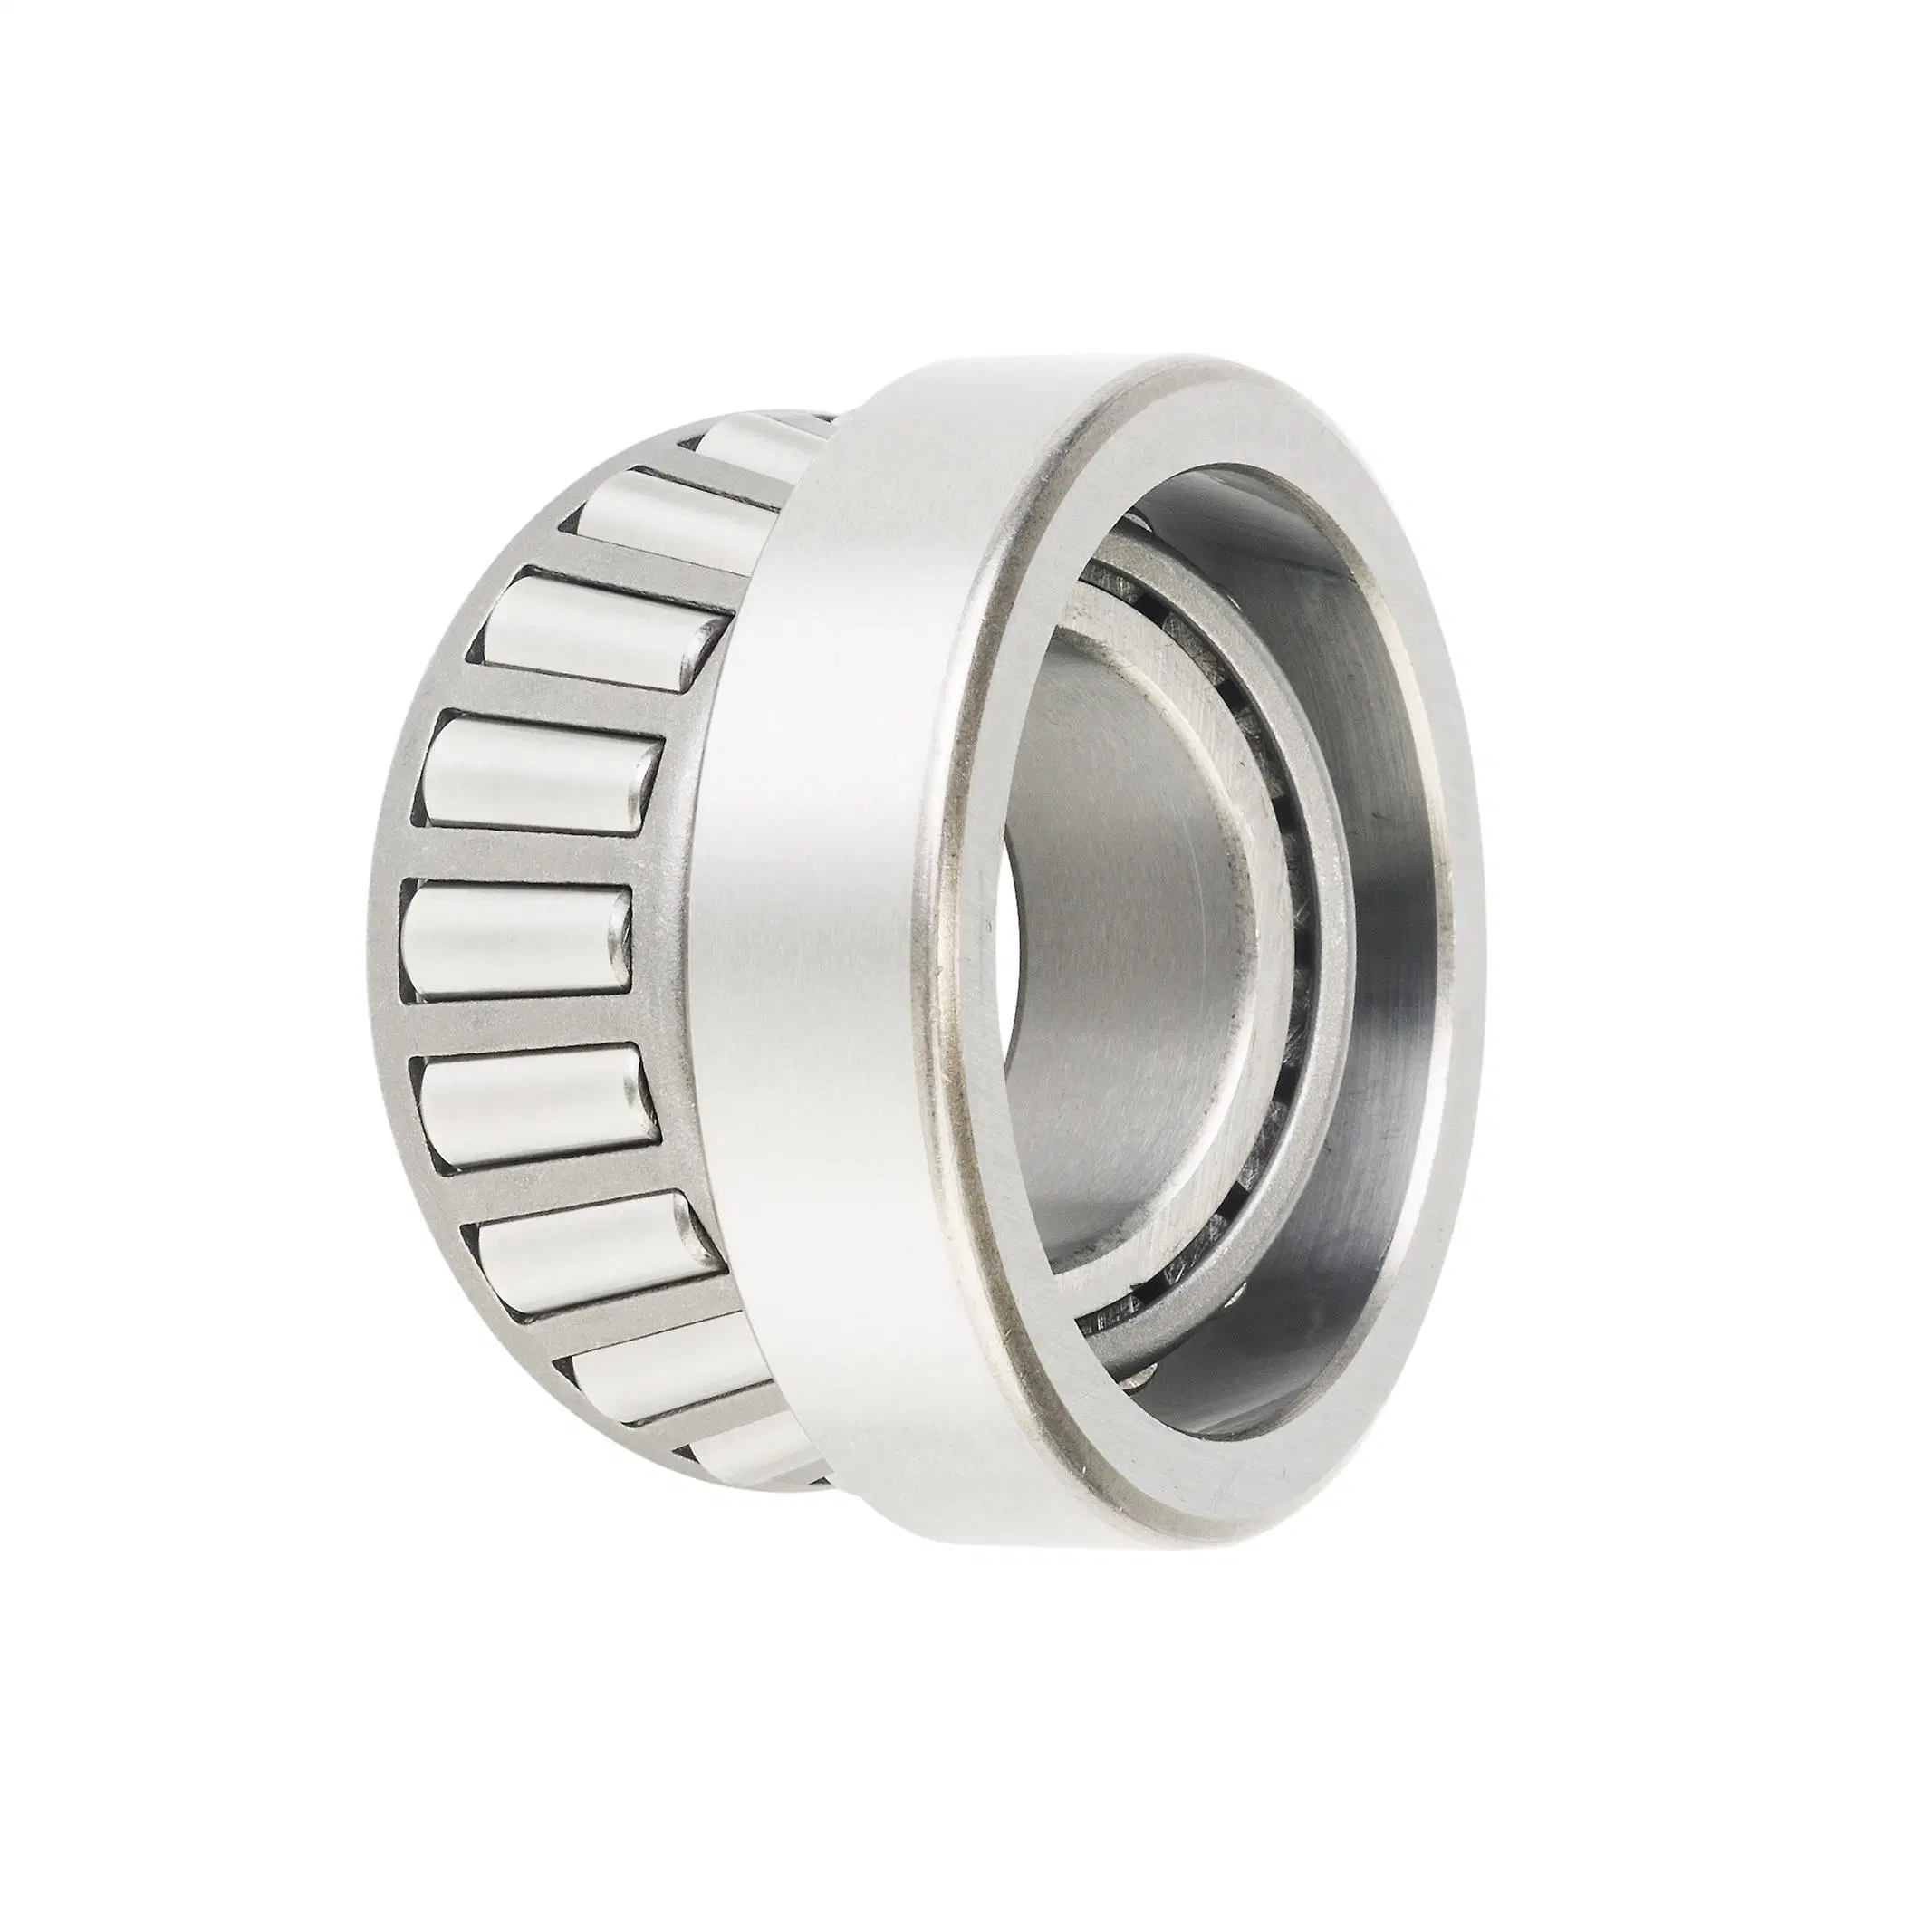 31307 Tapered Roller Bearing Ball Bearings with High Performance and High-Load Capacity for Industrial Equipment Contribution